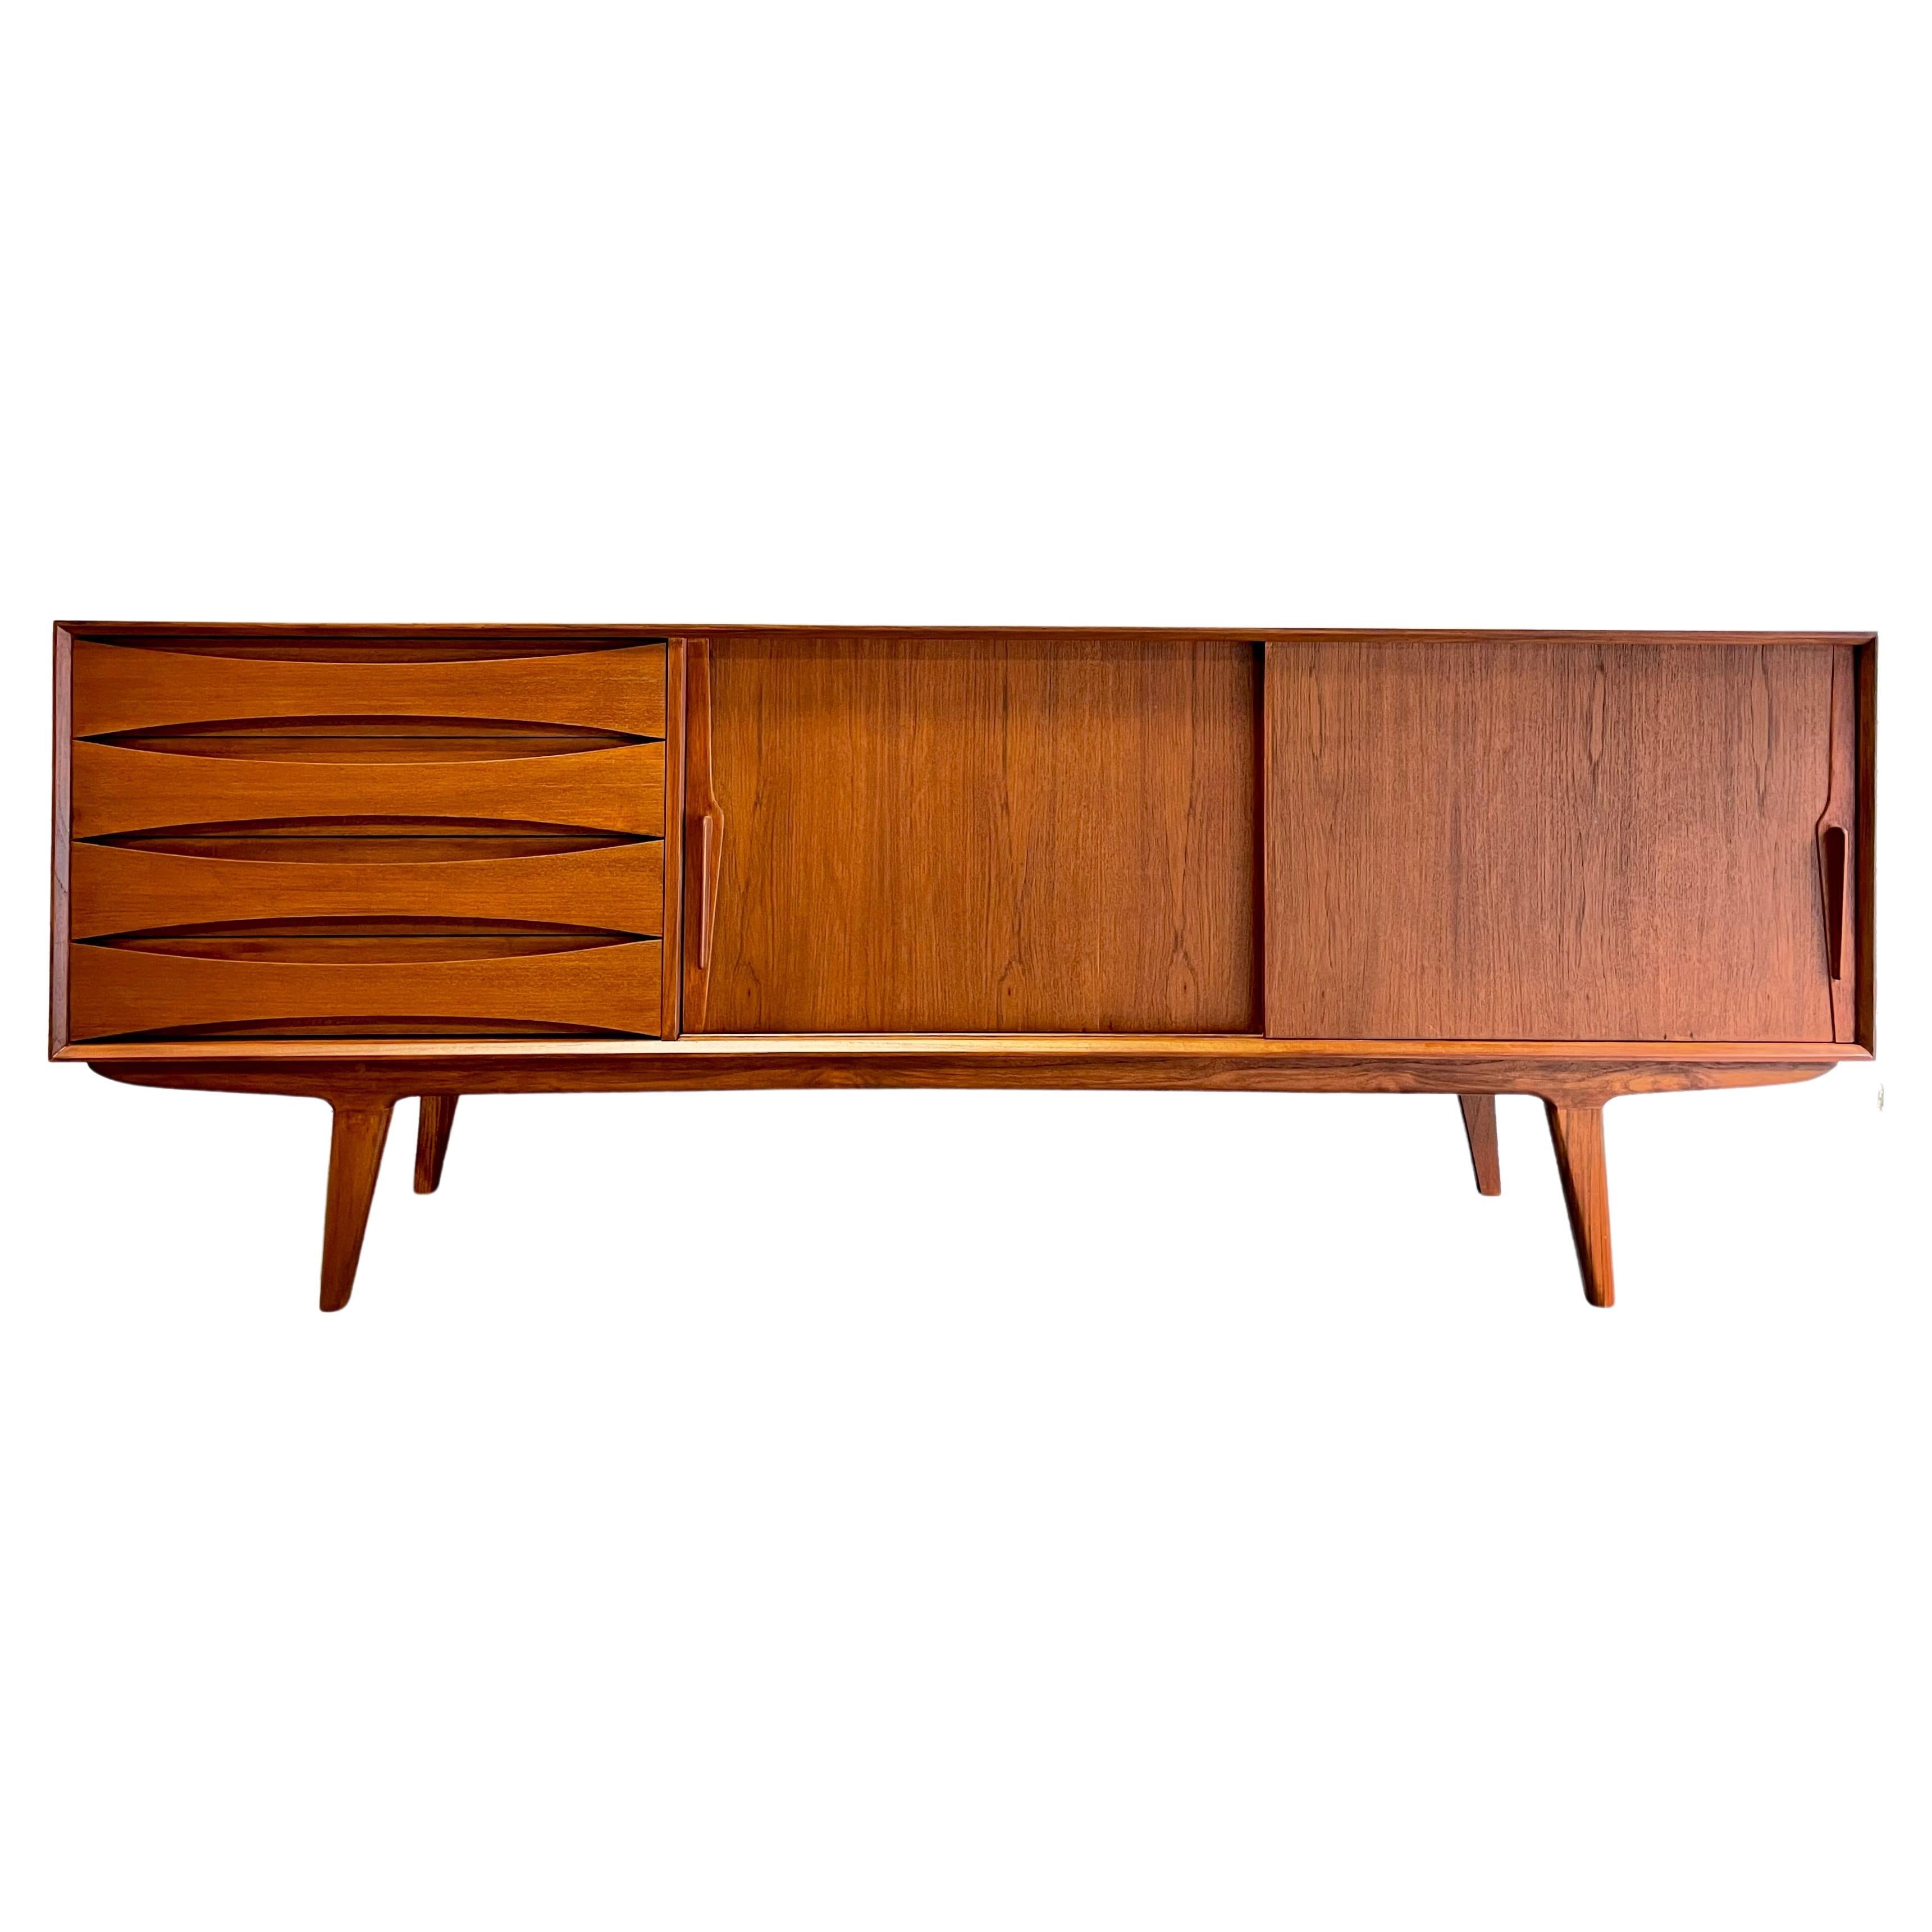 Extra LONG + Handsome Mid Century Modern styled Teak CREDENZA / Sideboard  For Sale